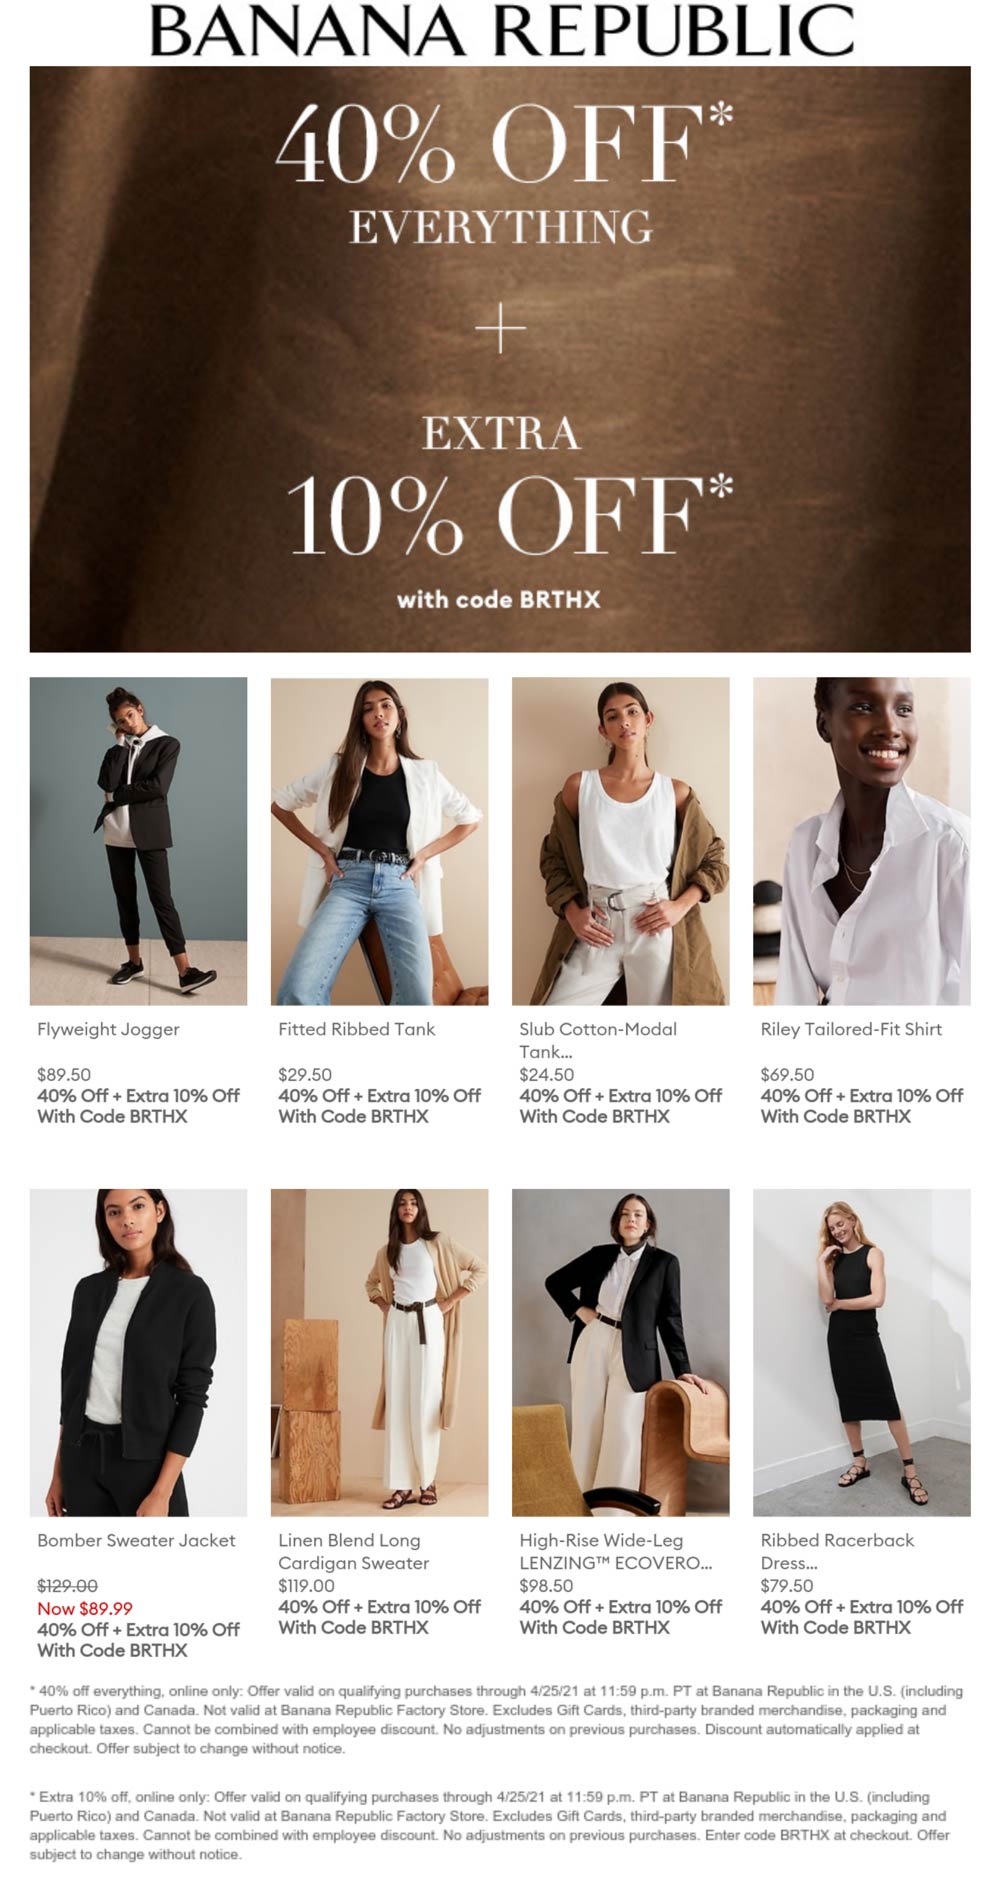 50-off-everything-today-at-banana-republic-or-online-via-promo-code